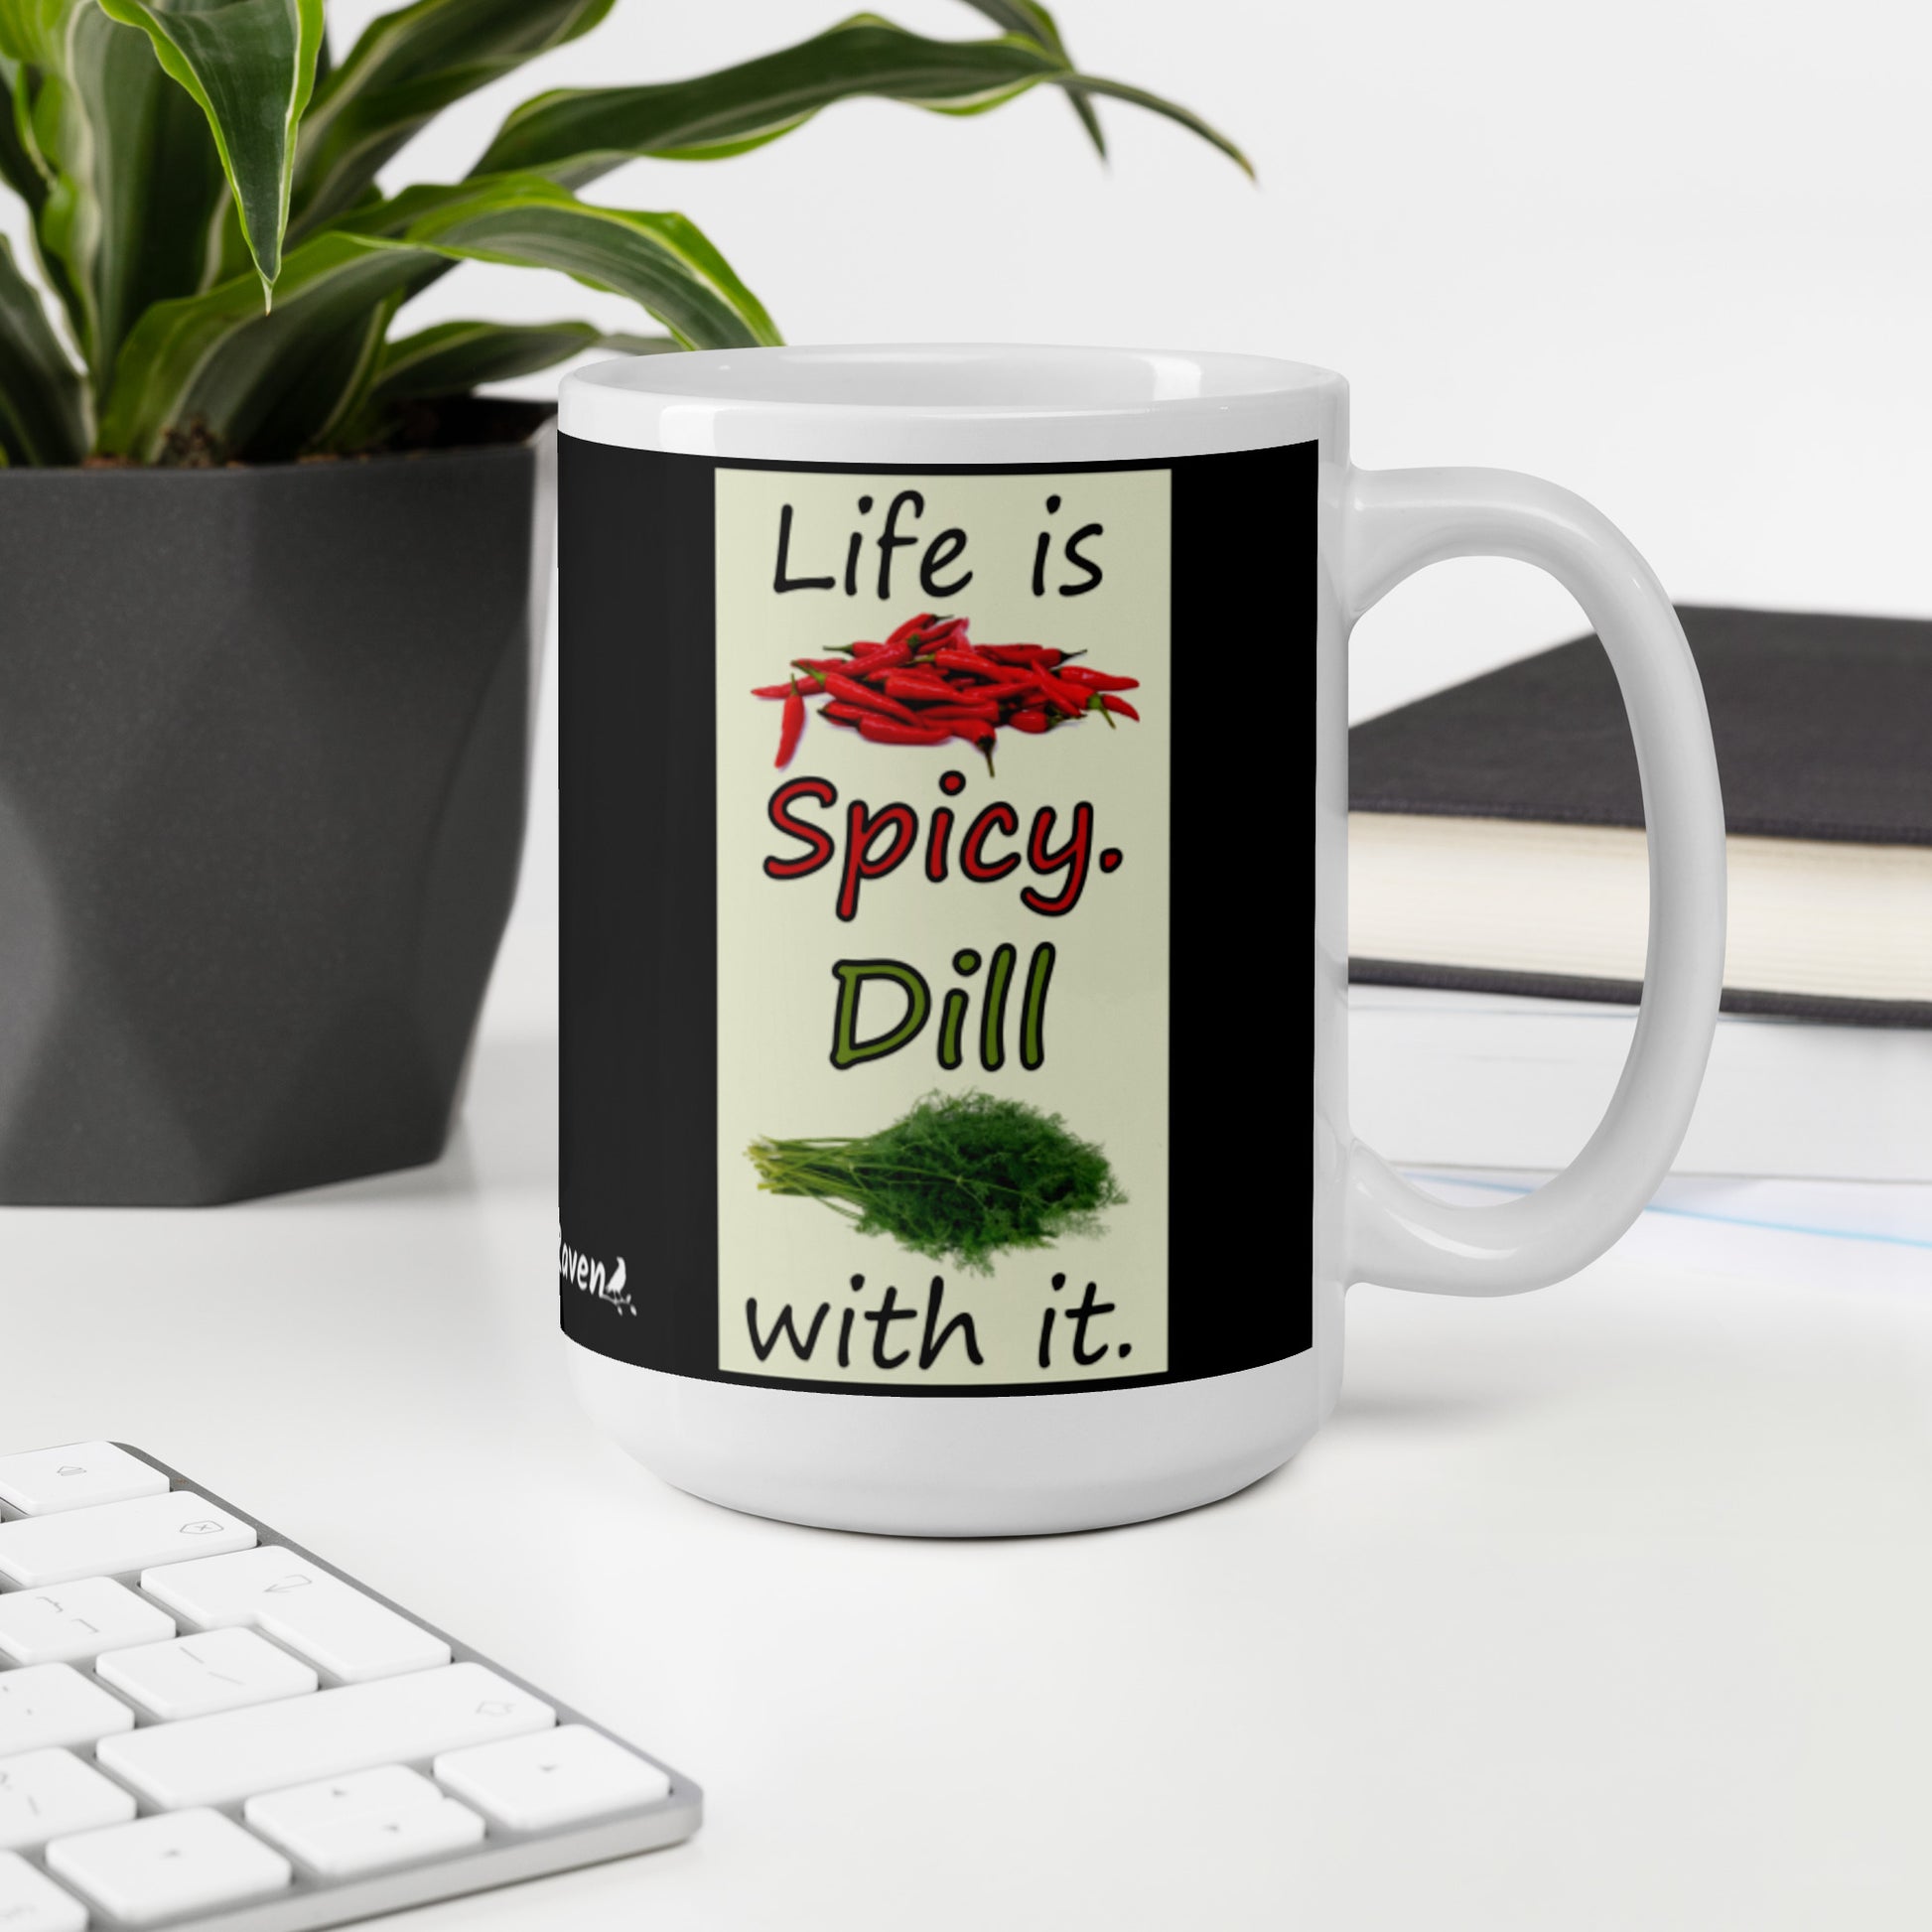 15 ounce white glossy ceramic mug. Life is Spicy. Dill with it text. Image of chili peppers and dill weed on a light yellow rectangle. Black background on mug. Shown on desktop by keyboard and potted plant.